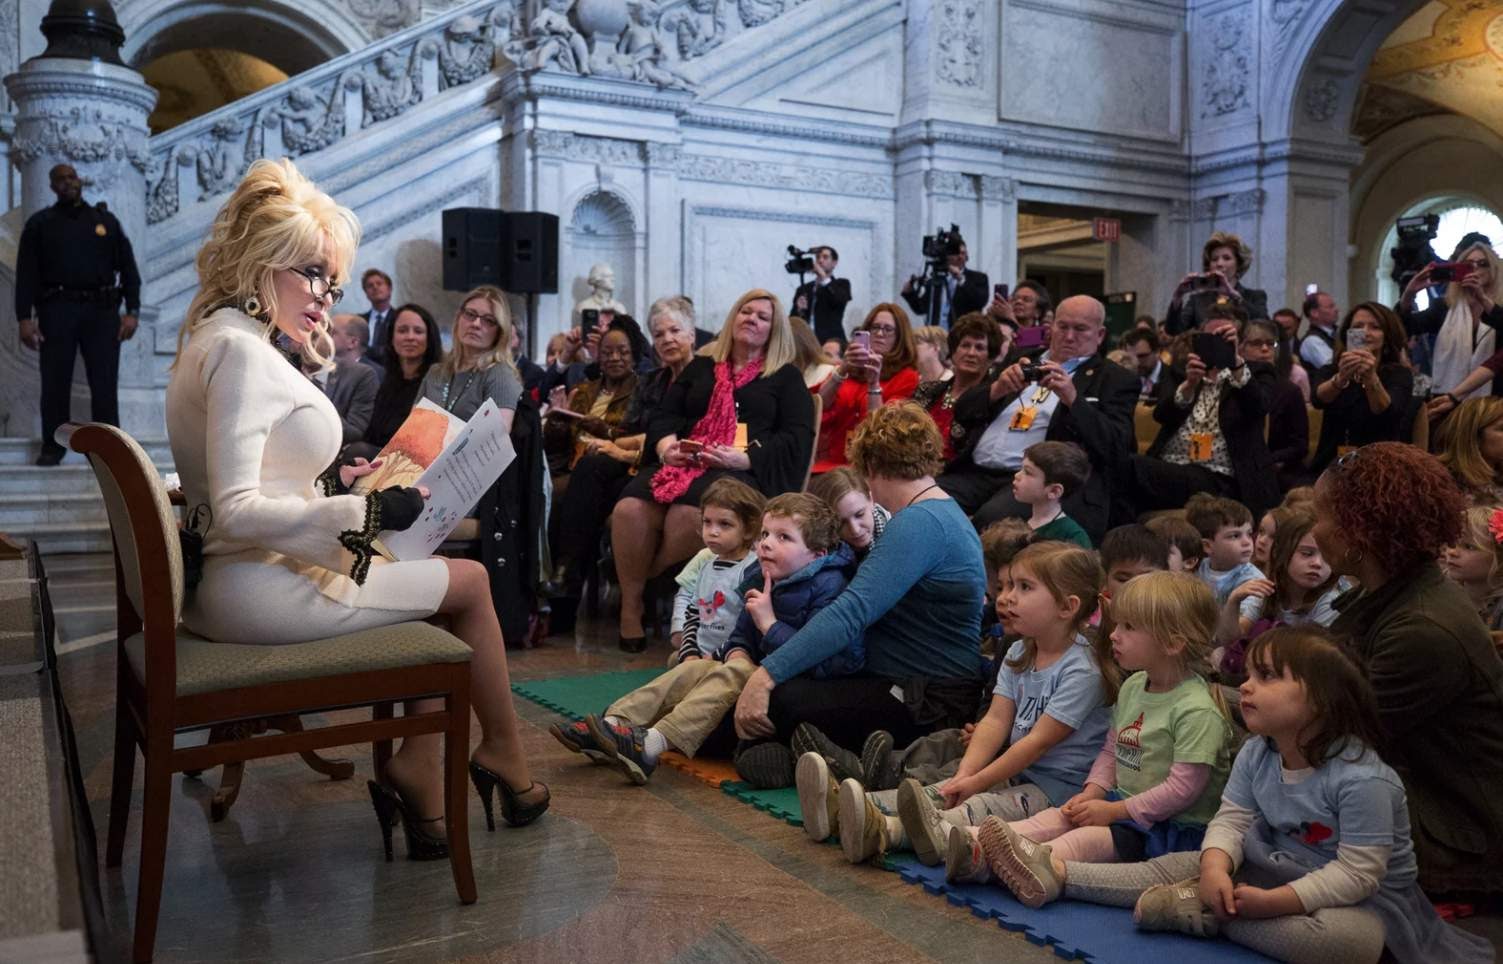 Dolly Parton, country music superhero, supports literacy charties